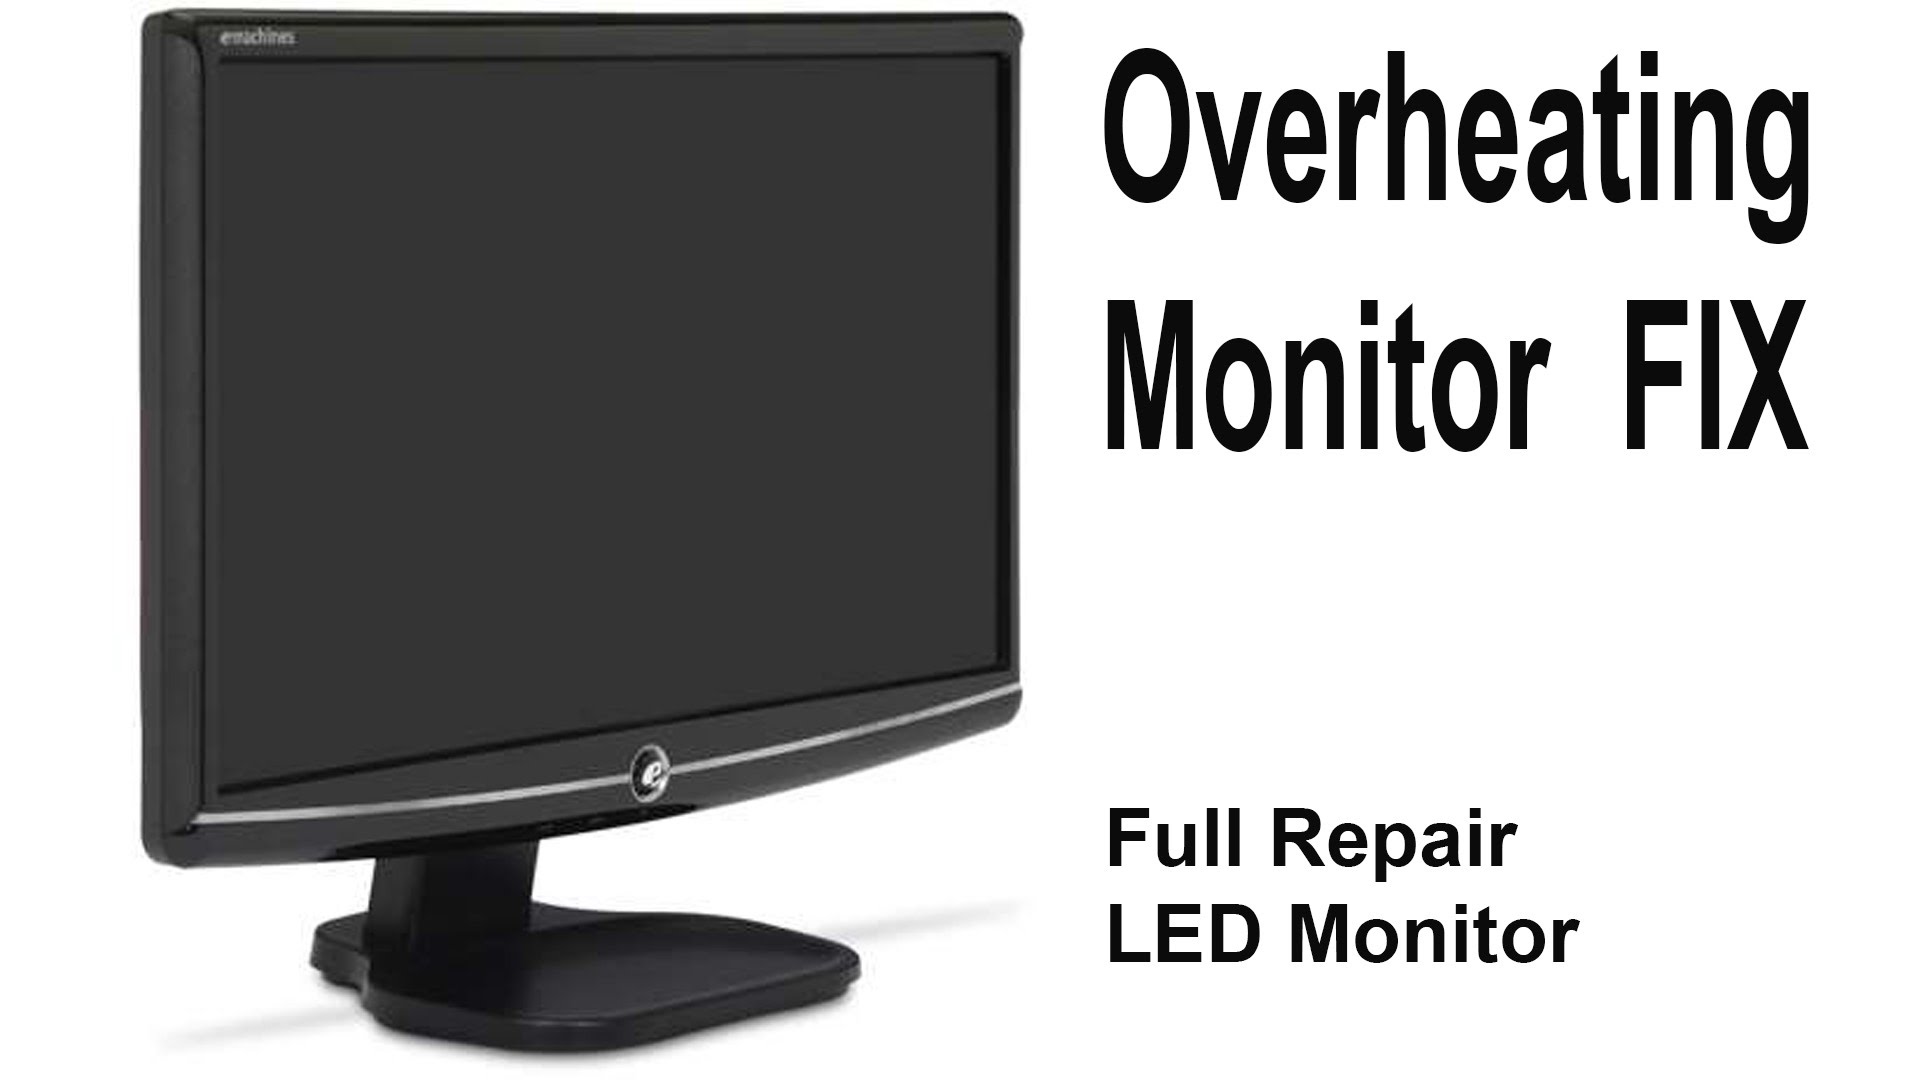 Emachines LED Desktop Monitor Automatically Turn-off Problem - YouTube